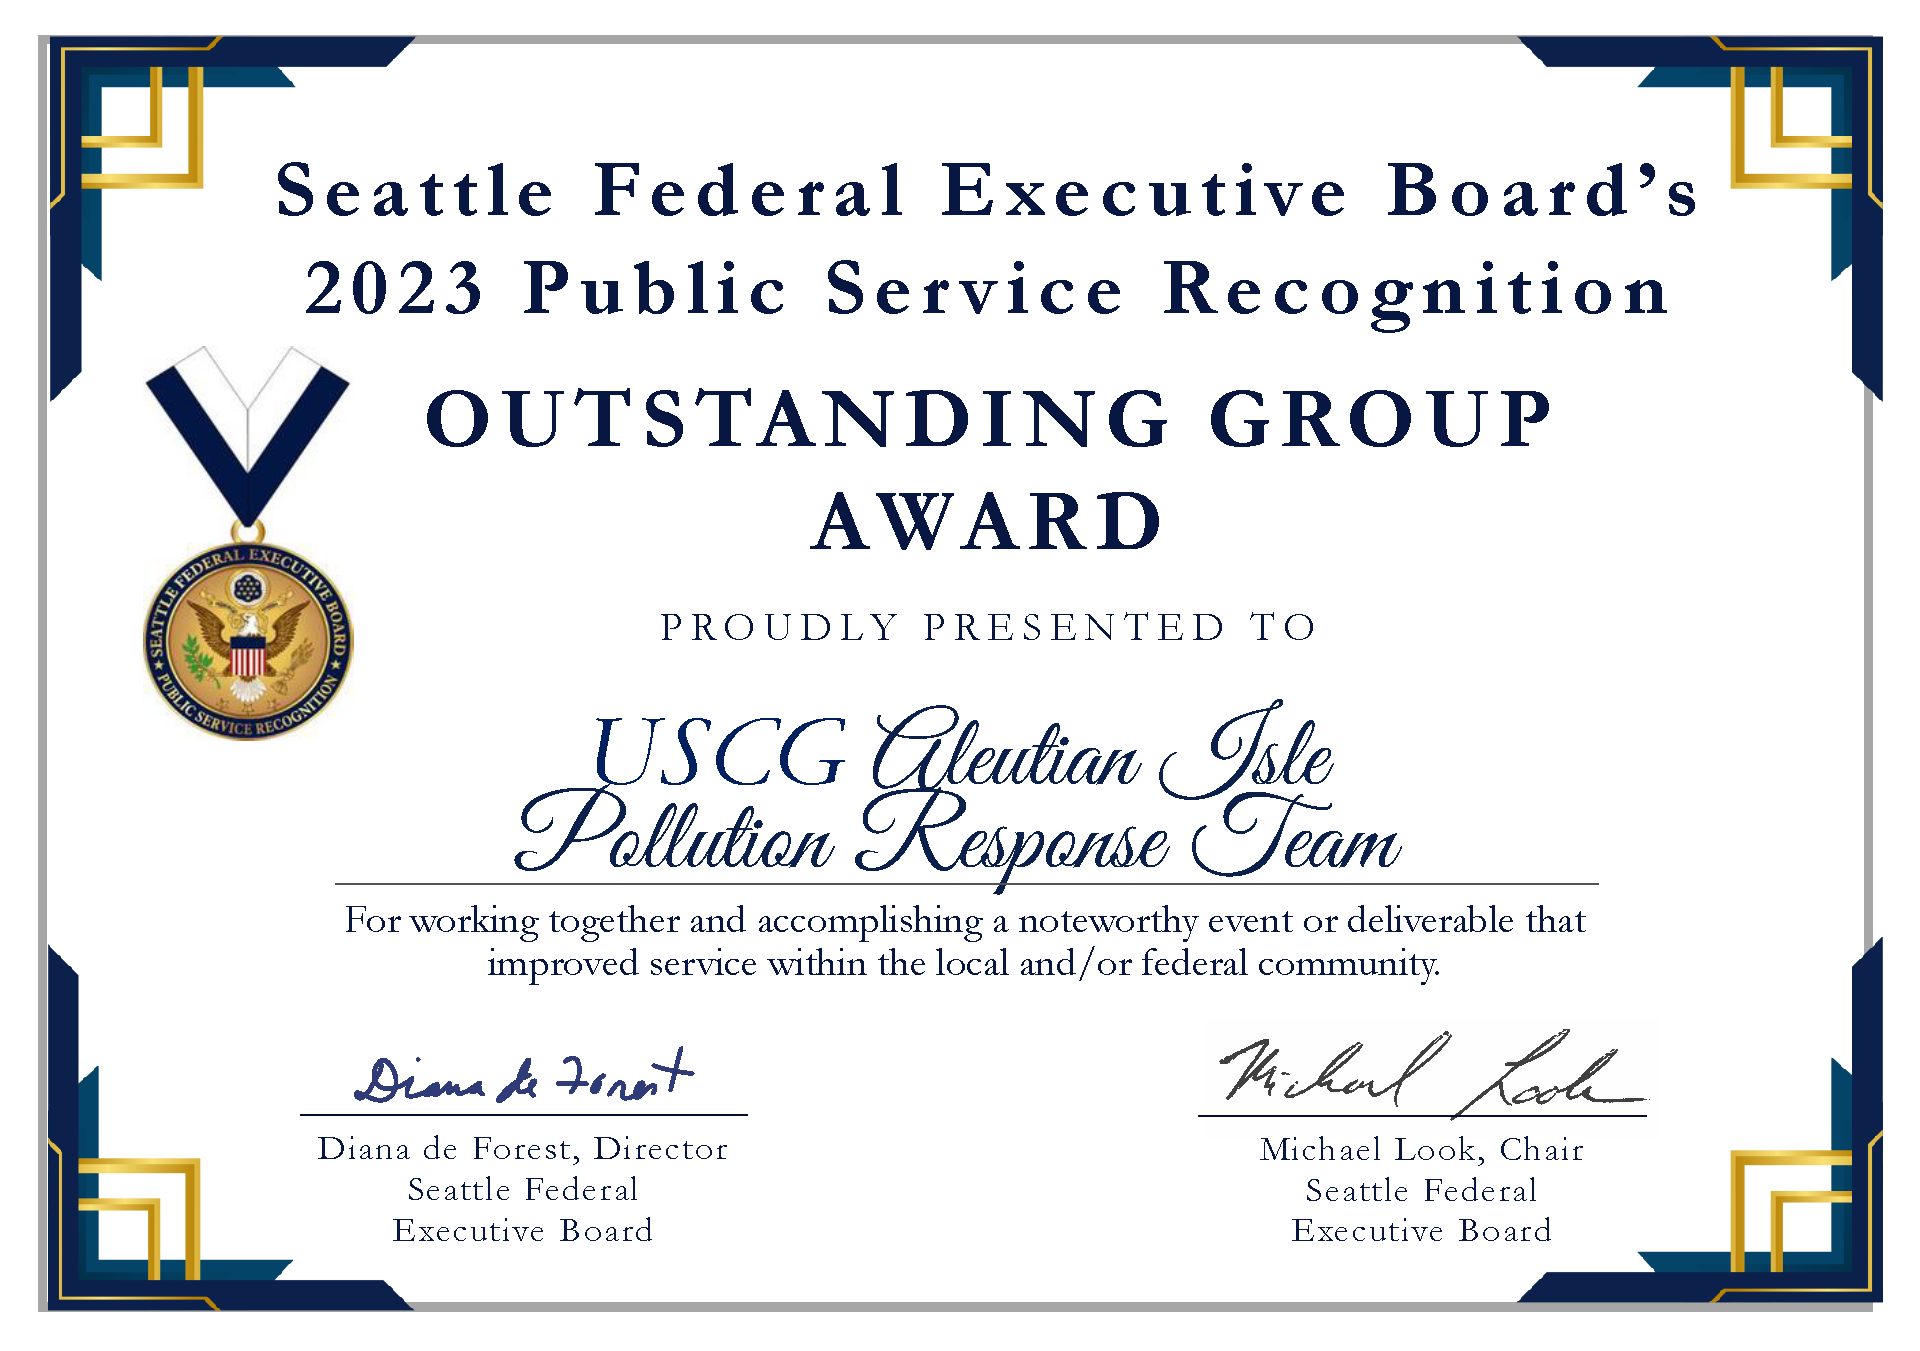 A certificate for the Outstanding Group Award to members of NOAA OR&R, Center for Operational Oceanographic Products and Services, National Weather Service, and National Marine Fisheries Service and other agencies for their collective work on the response to the F/V Aleutian Isle sinking in Washington state. Image credit: SFEB